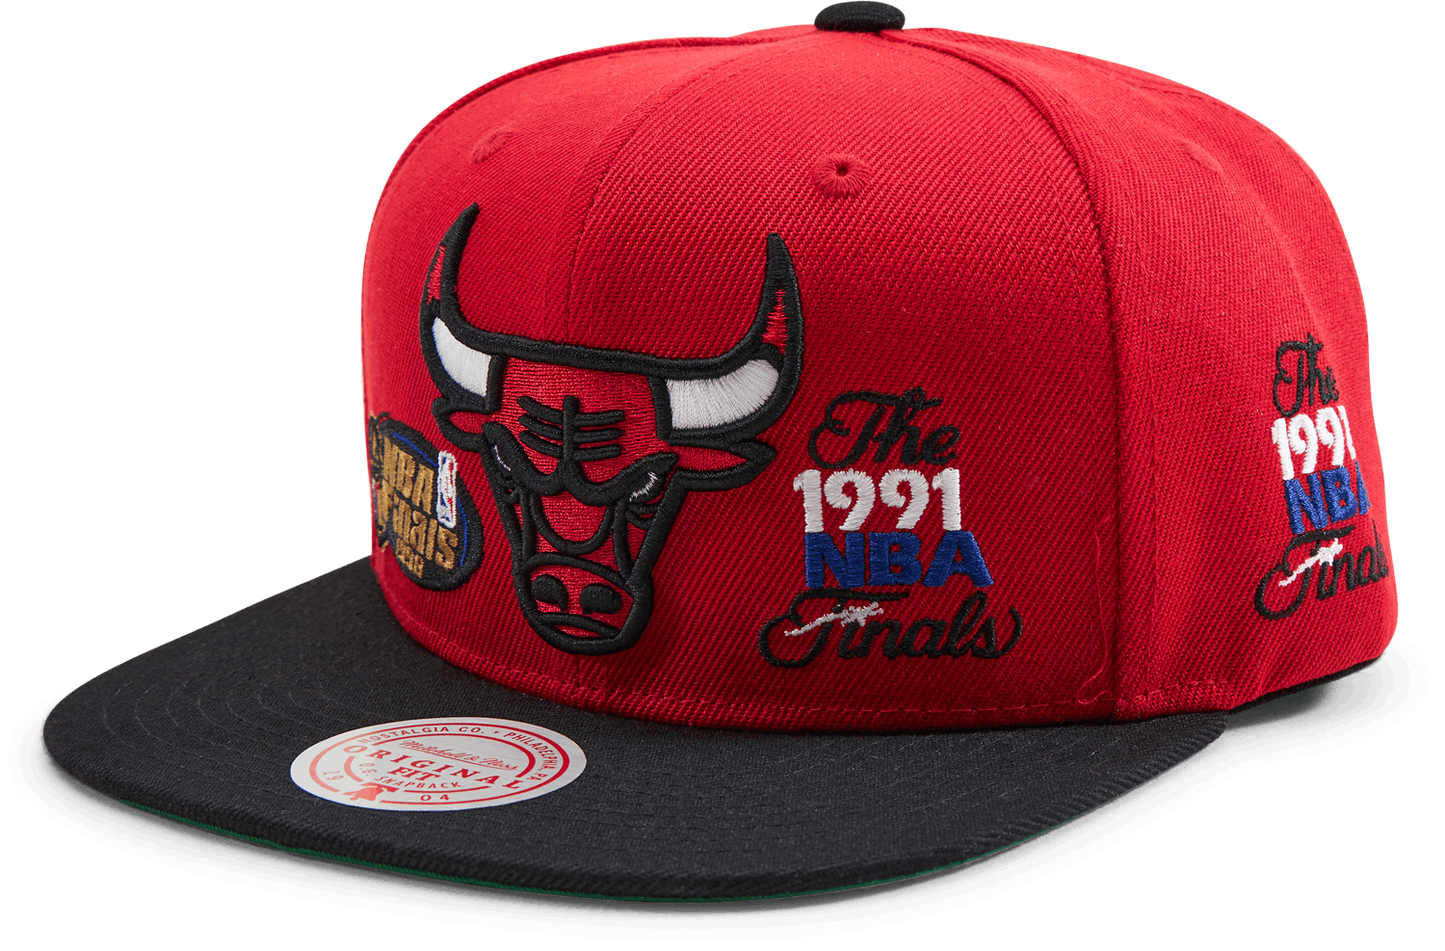 Men's Chicago Bulls NBA Patched Up 2 Tone Red/ Black Mitchell & Ness Adjustable Snapback Hat